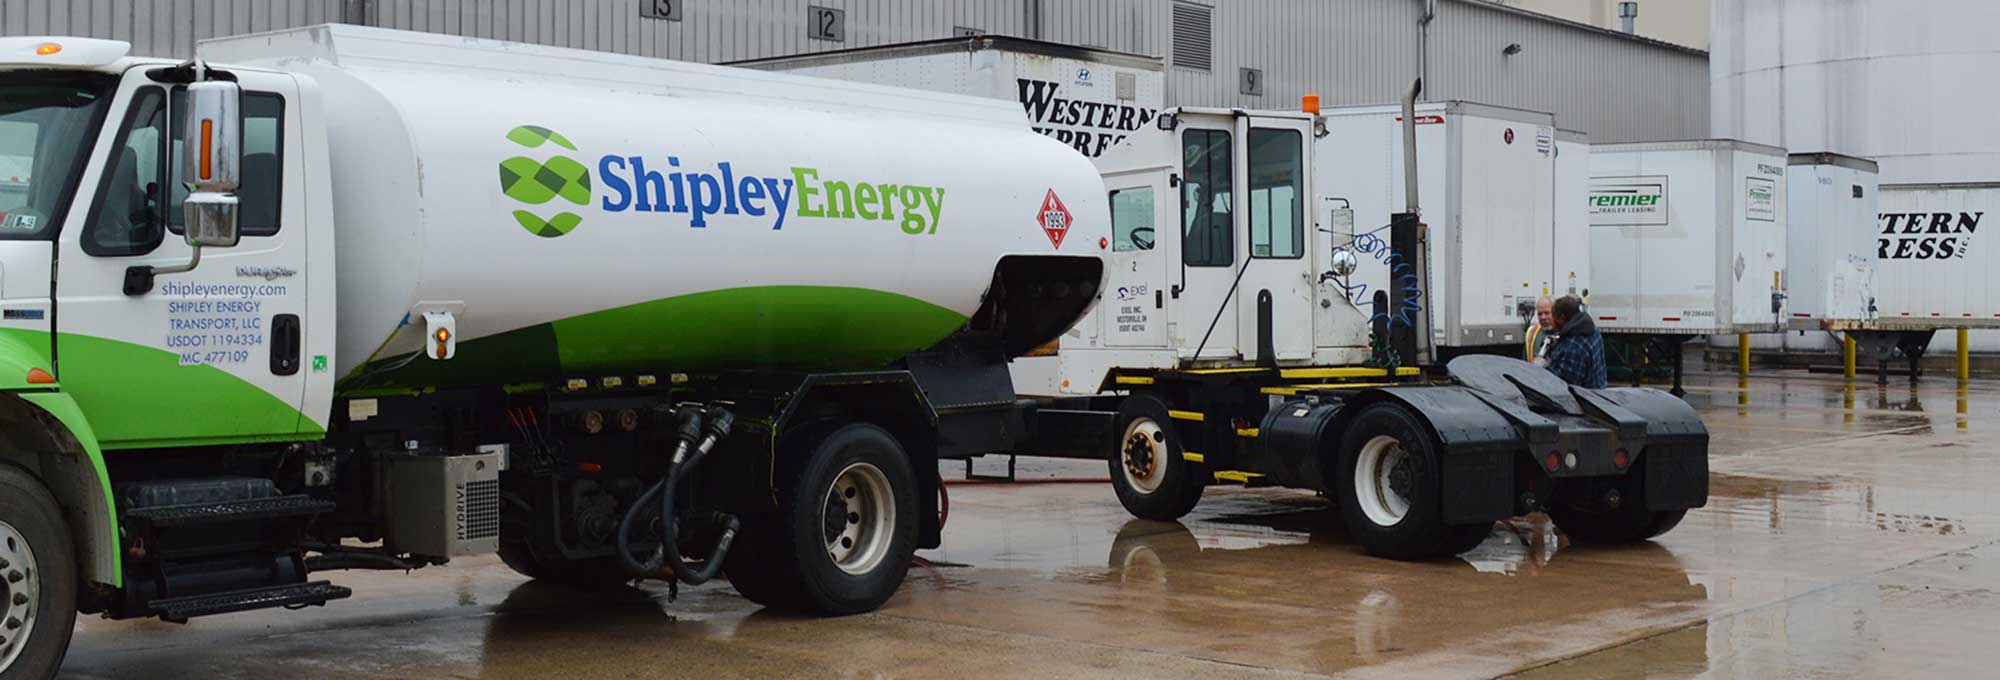 How to Get Started With Shipley Energy